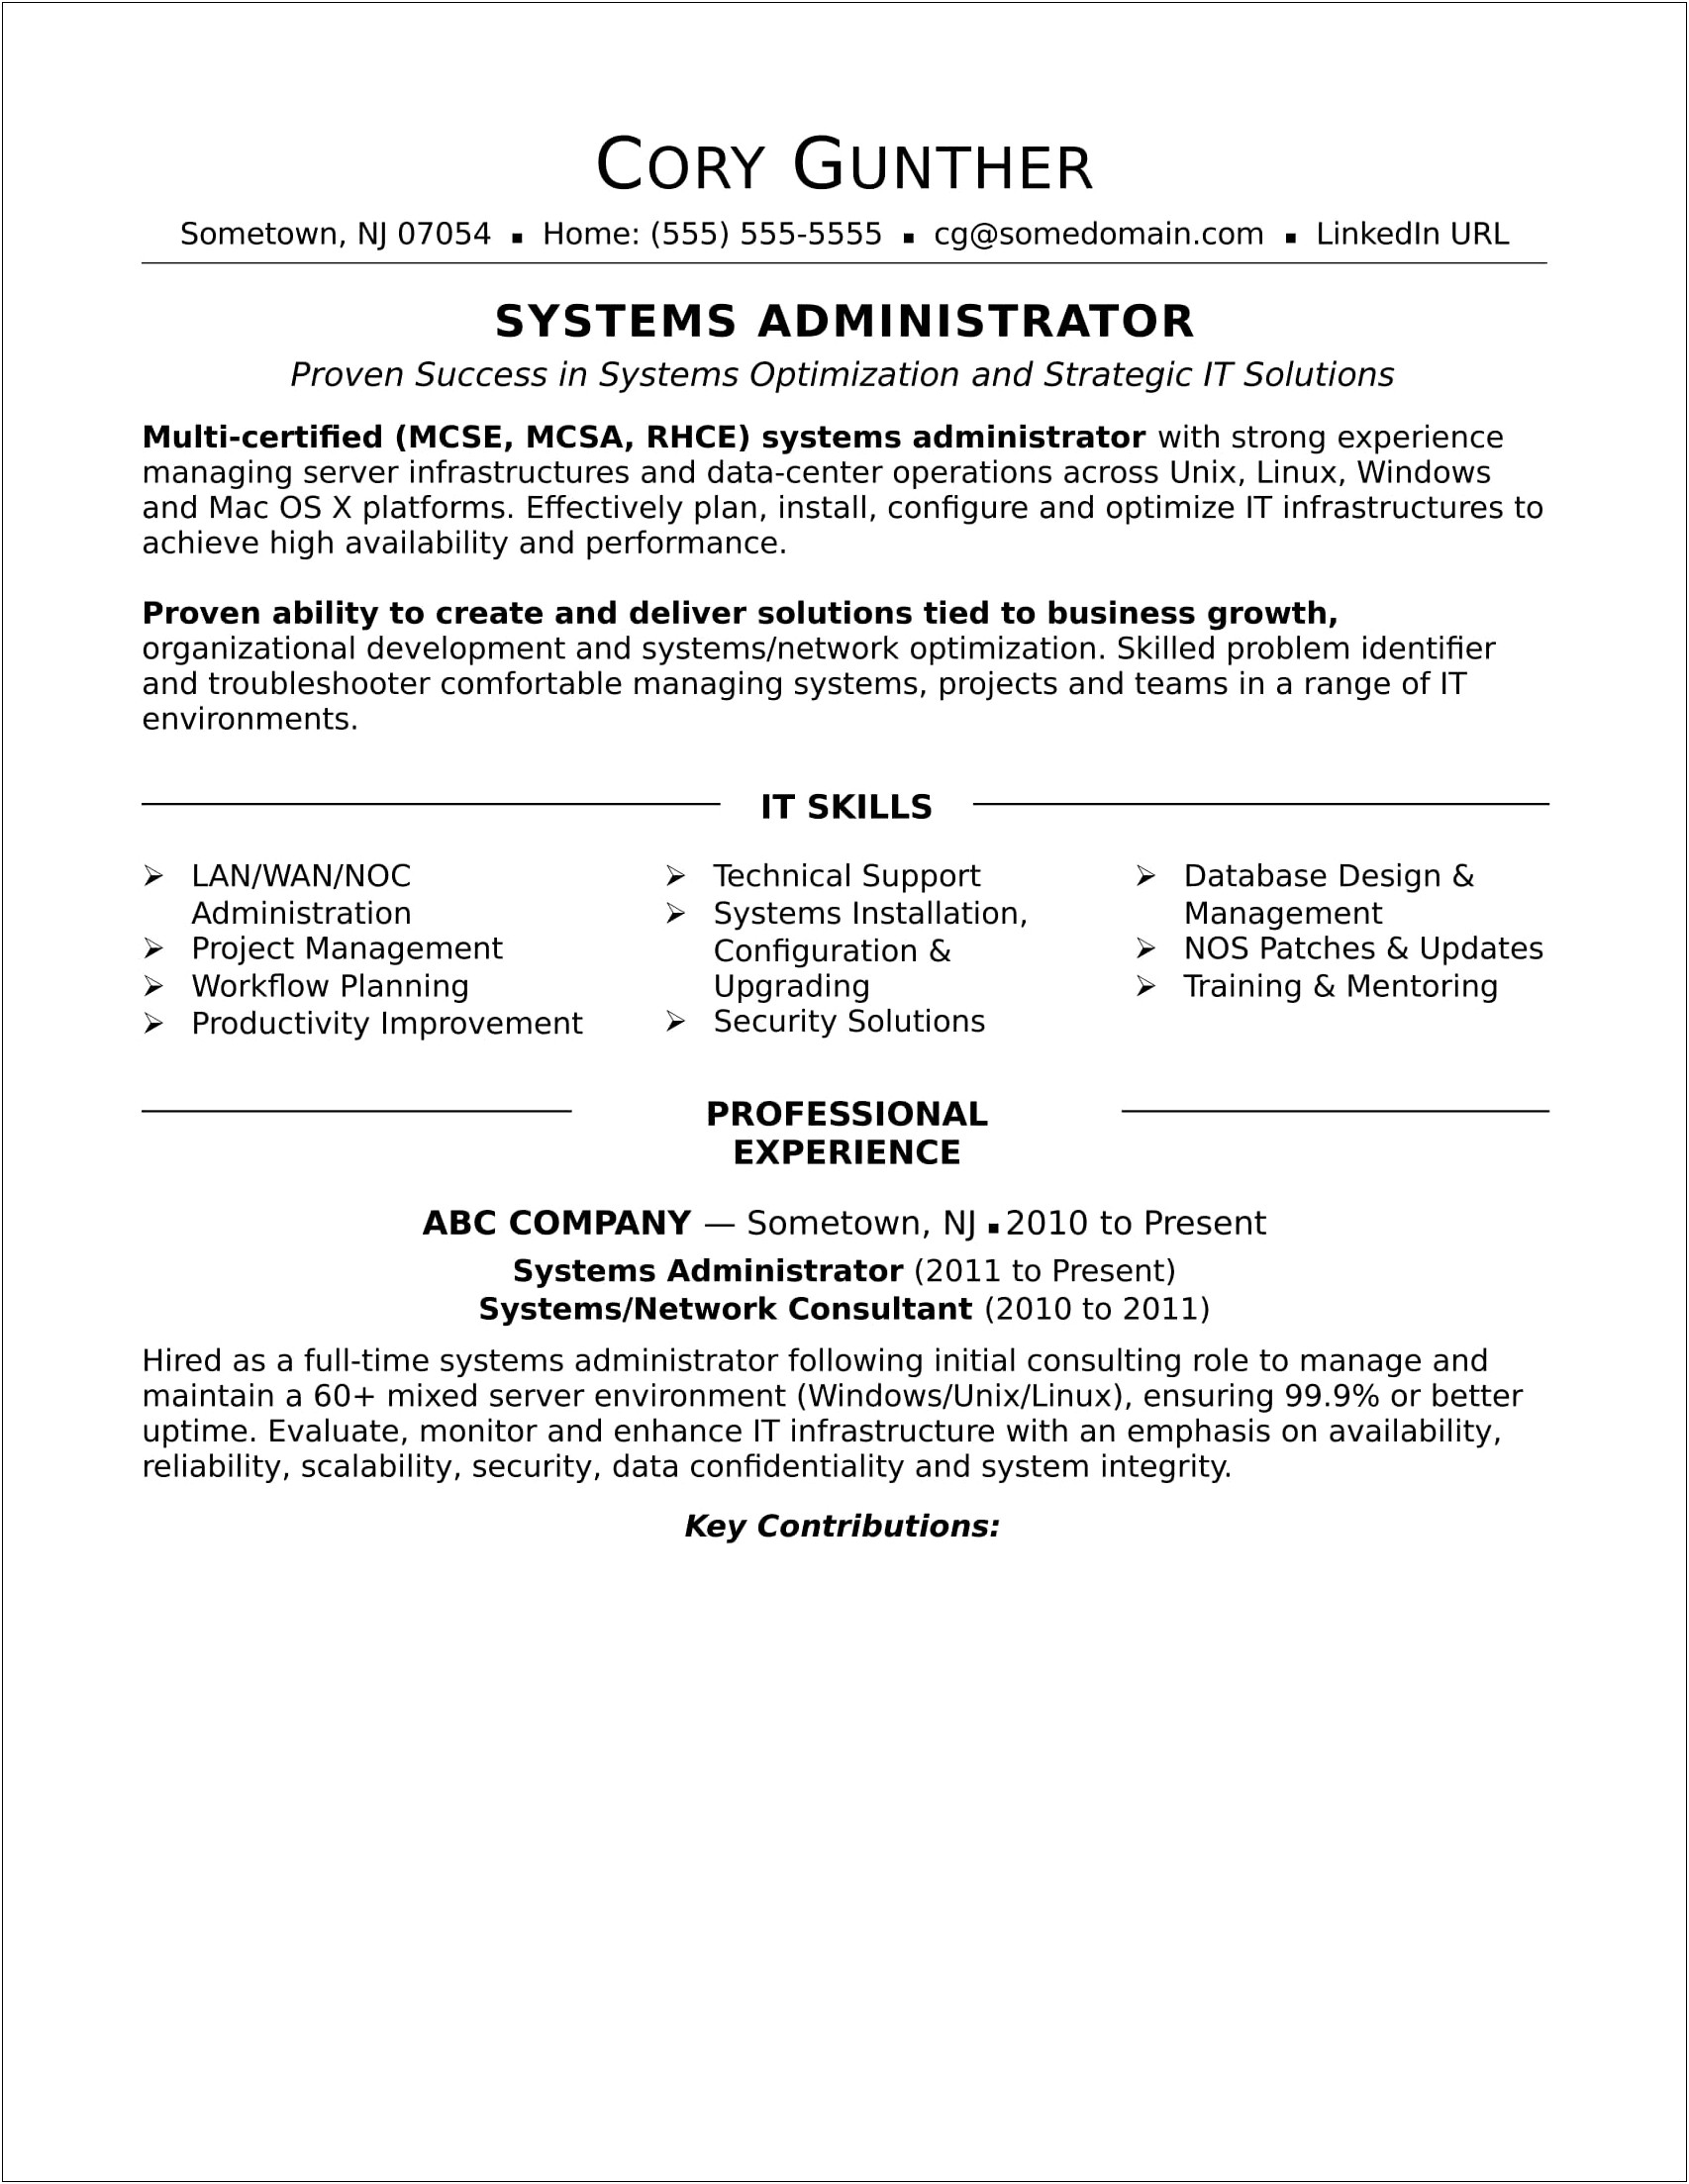 Resume List Skill With Small Amount Of Experience